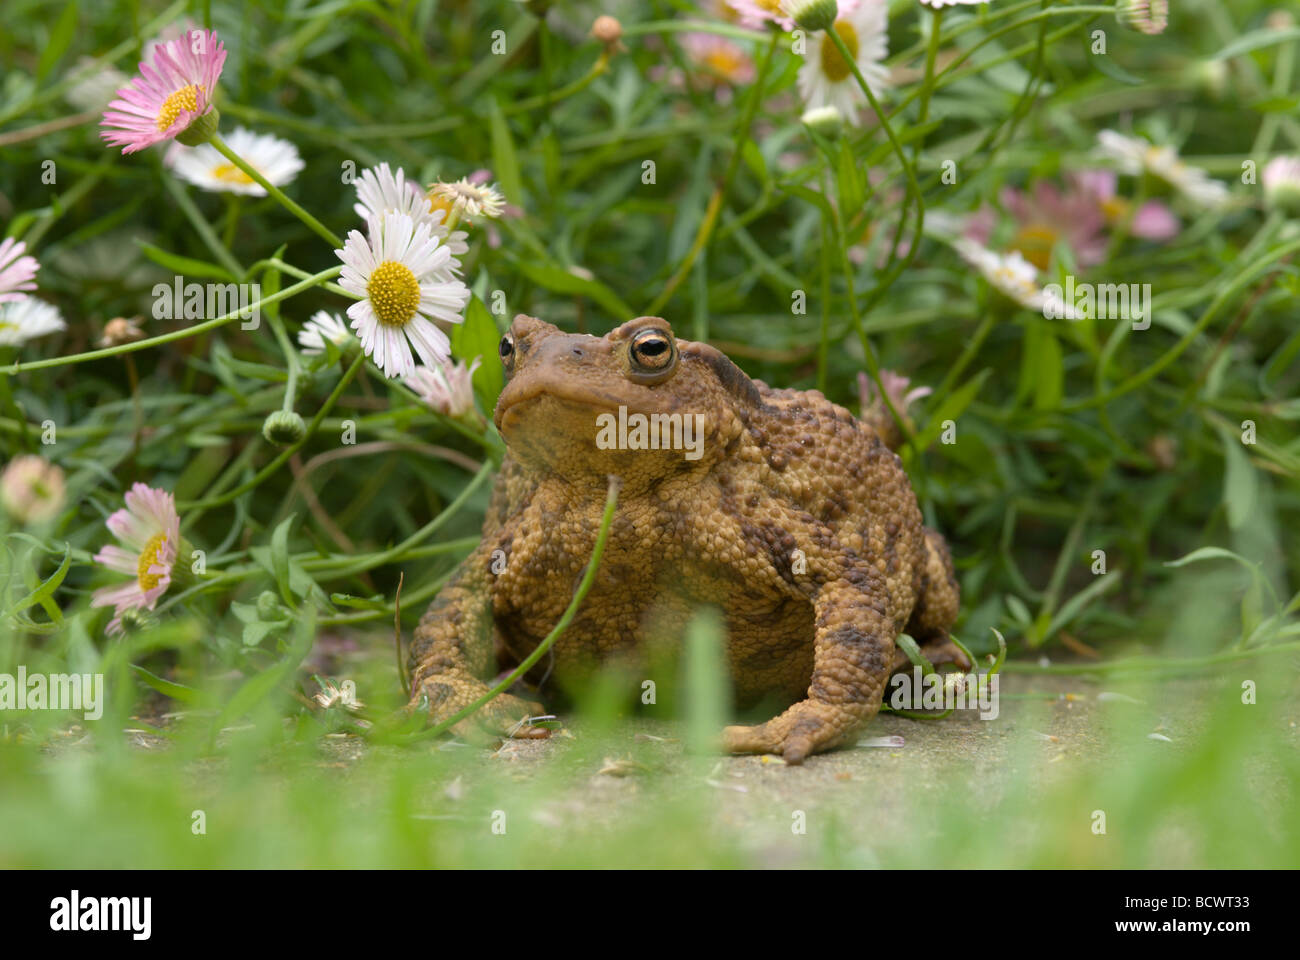 Common toad, Bufo bufo, in garden on grass under daisies, daylight, Sussex, UK. Stock Photo